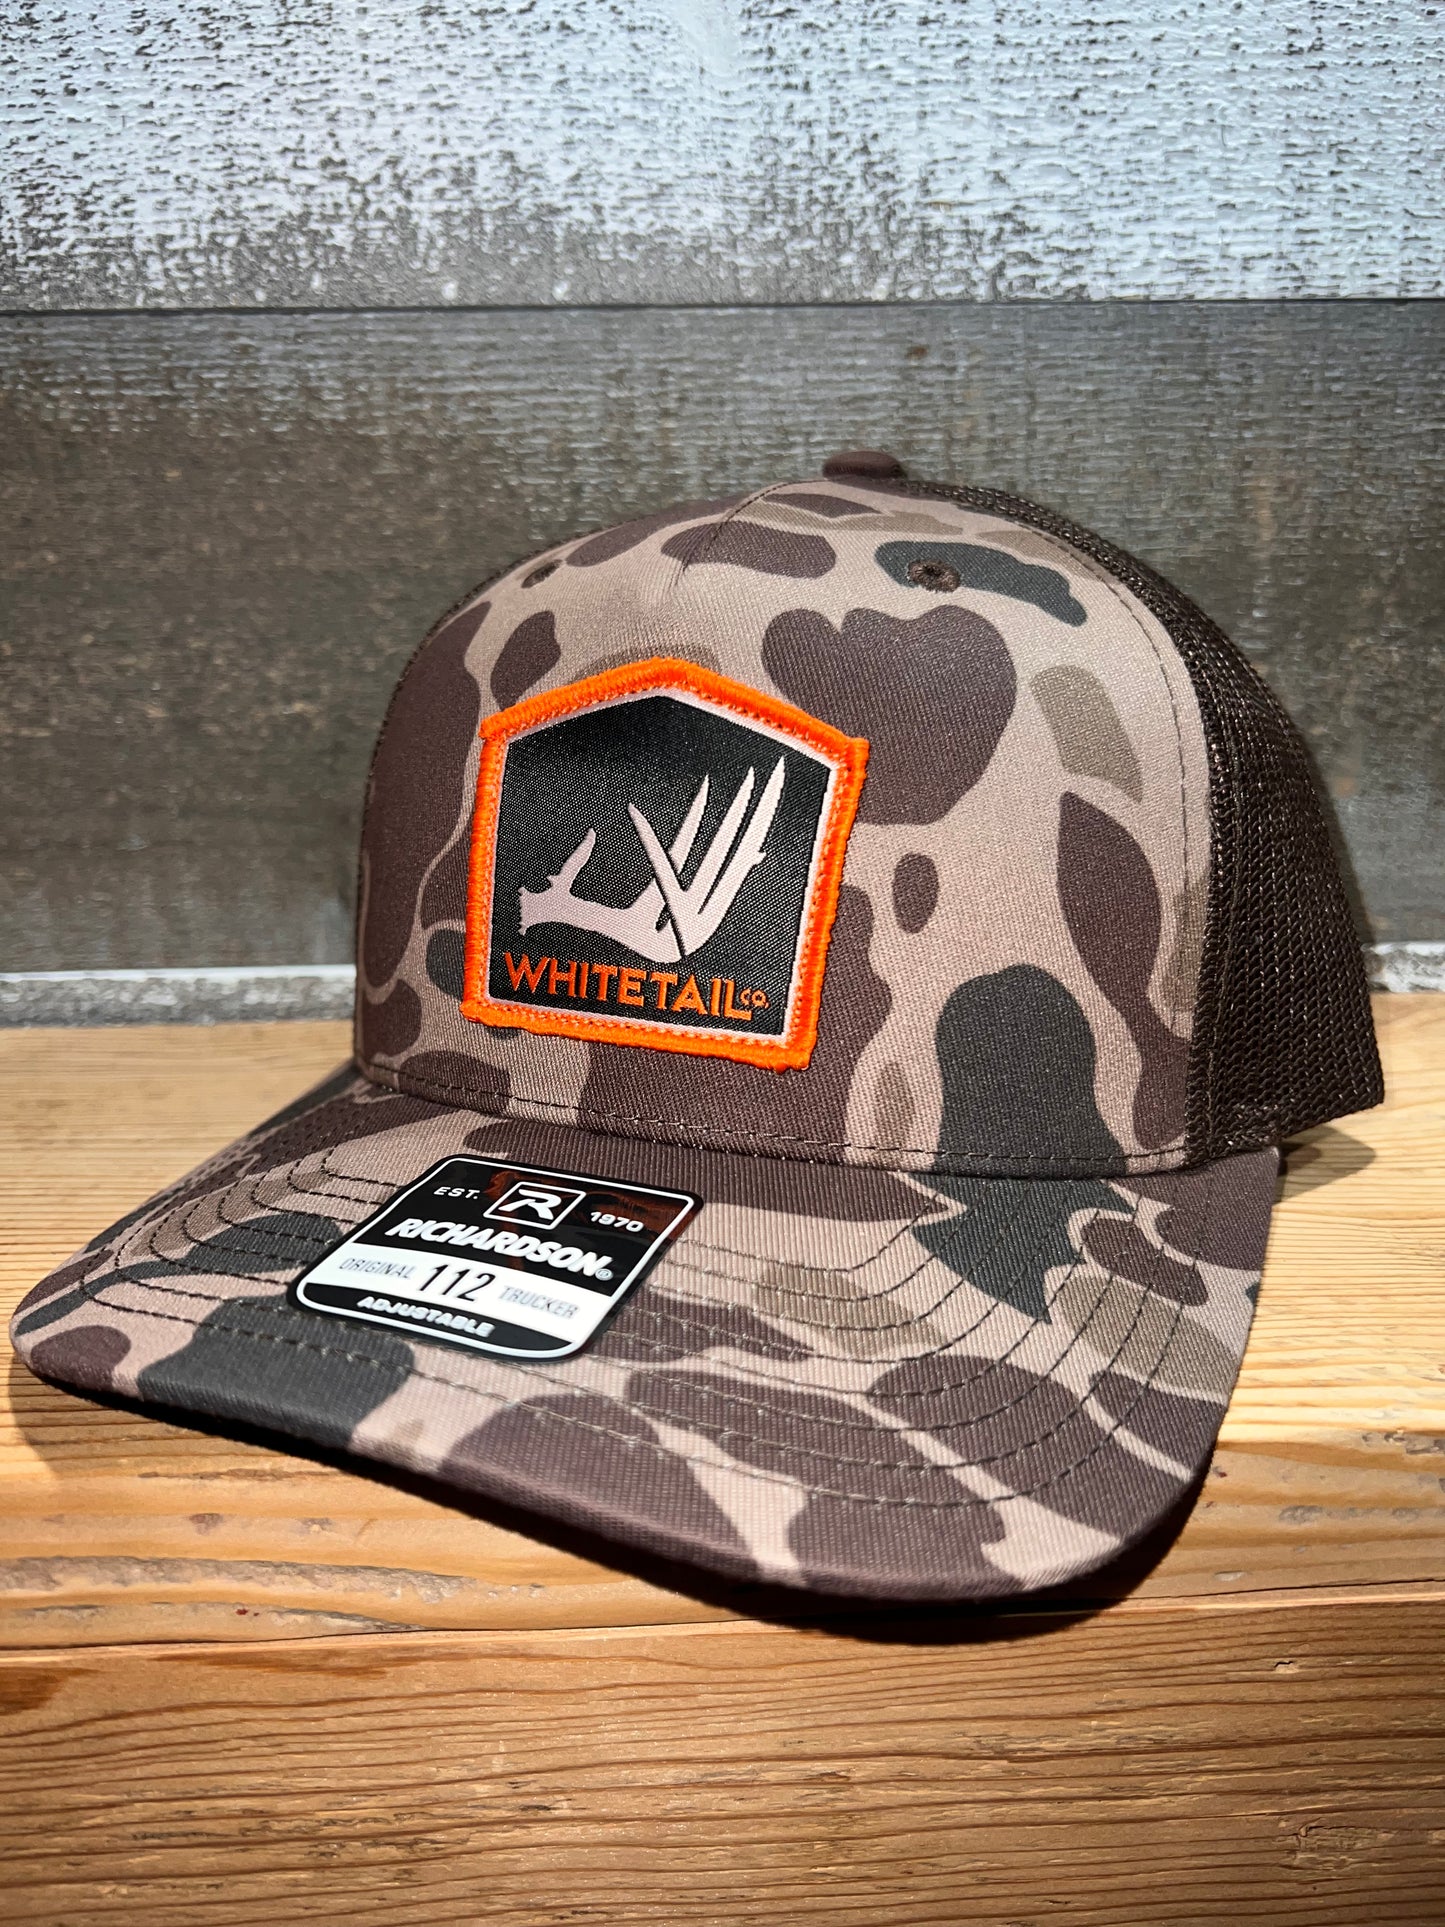 Whitetail Co. Duck 🦆 Camo 5 Panel Shed Hunter